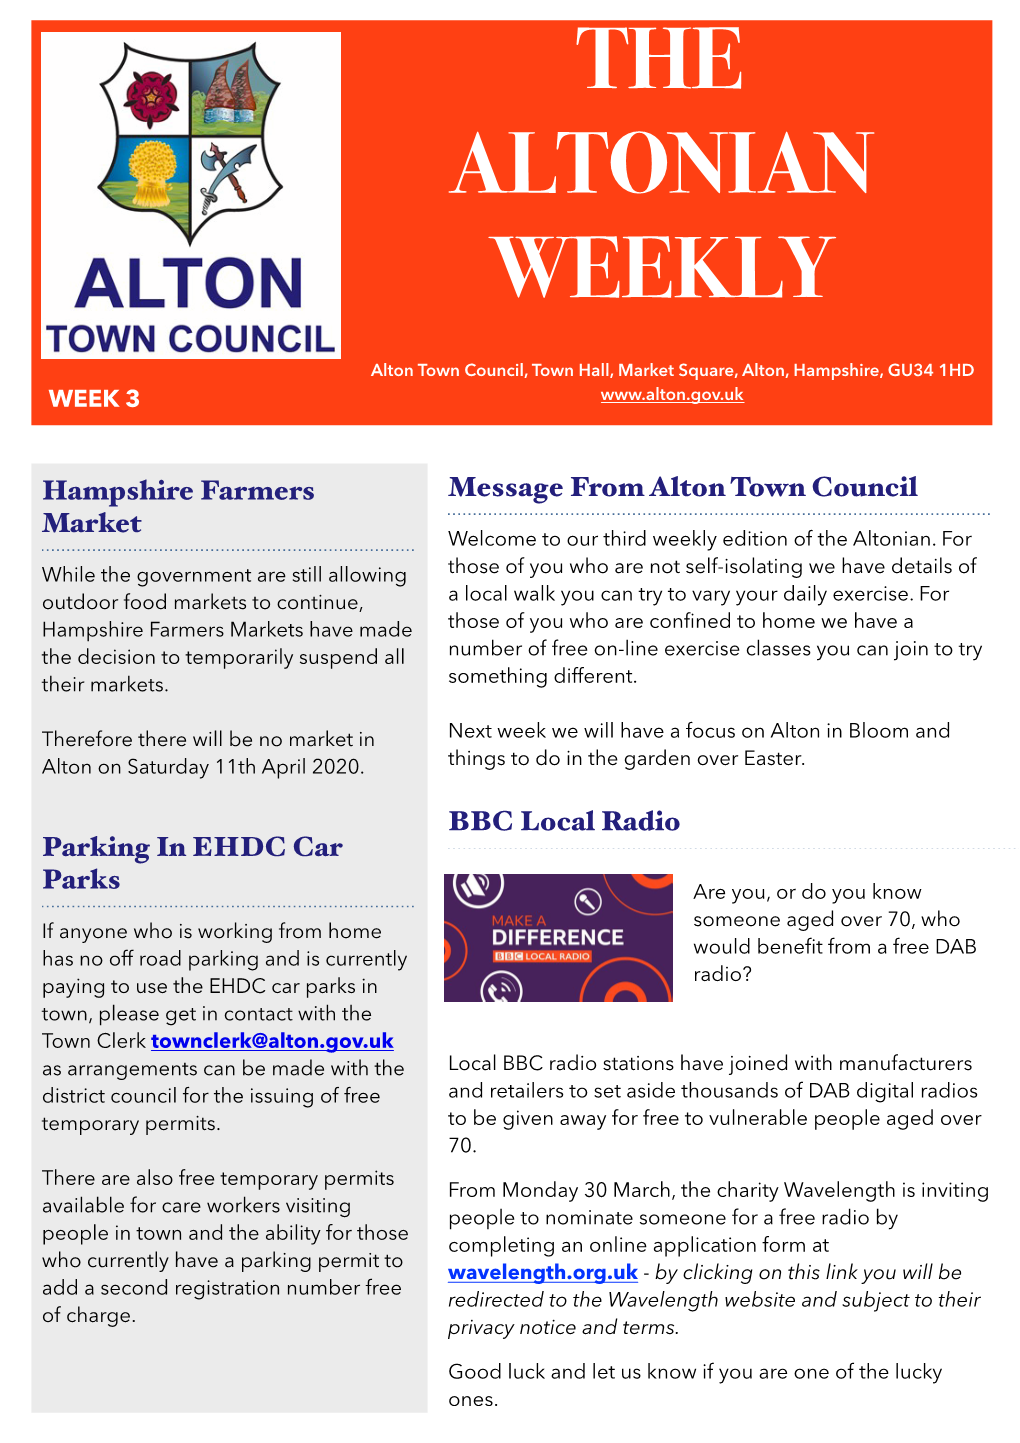 The Altonian Weekly